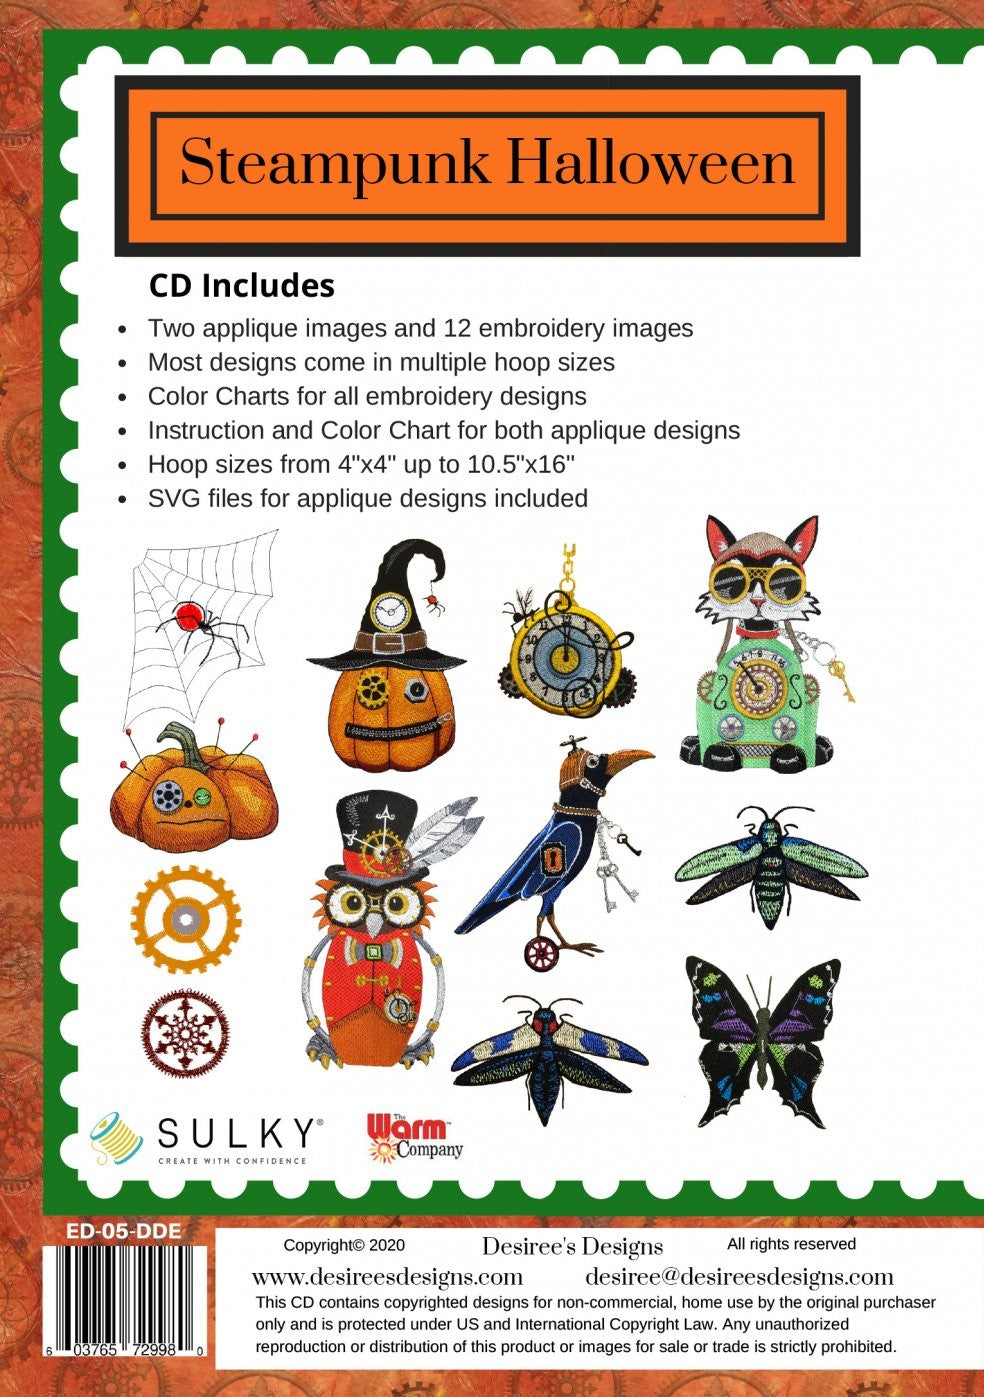 Steampunk Halloween - Embroidery CD